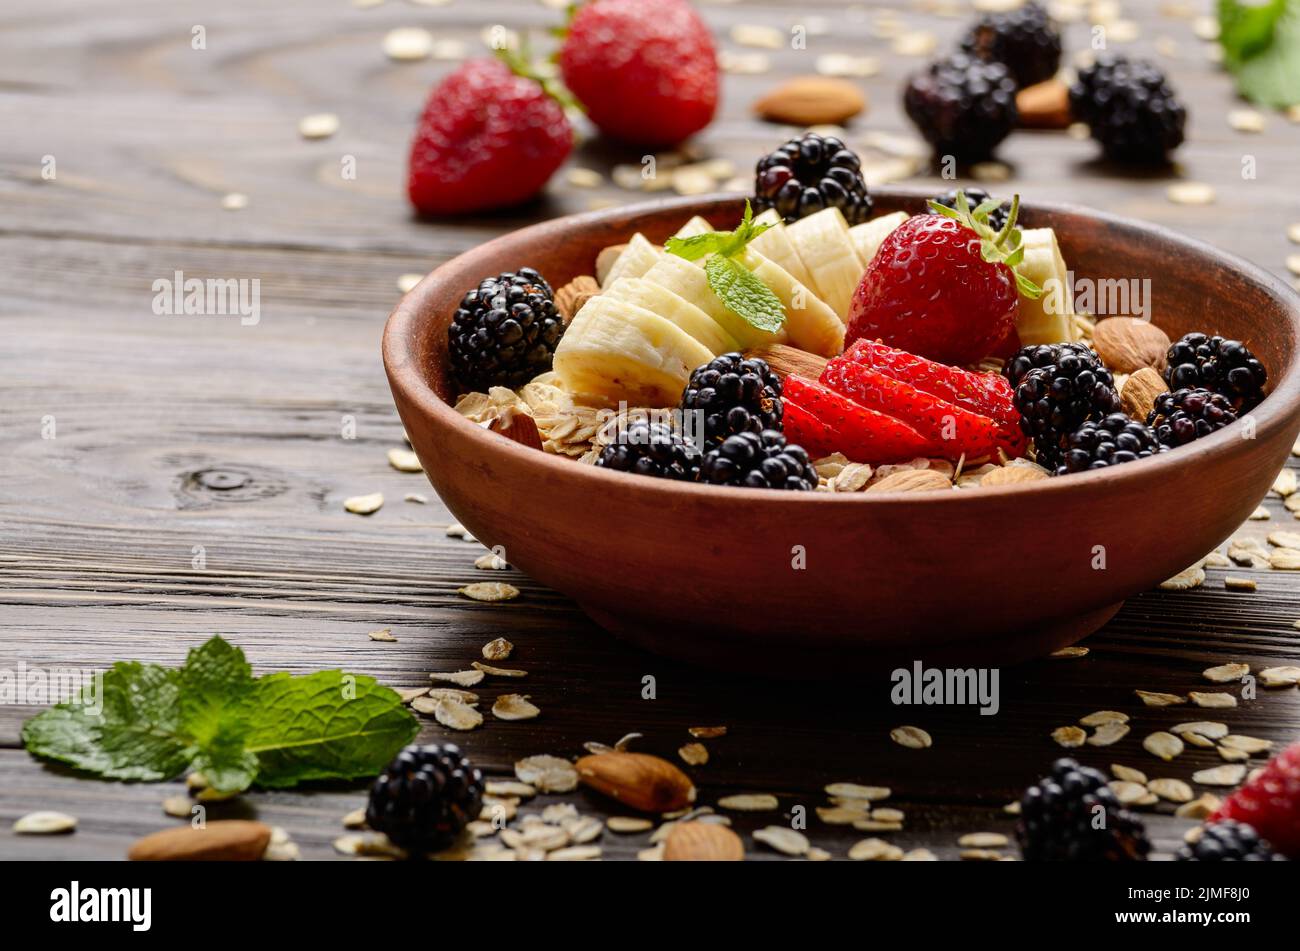 Fruit healthy muesli with banana strawberry almonds and blackberry in clay dish on wooden kitchen table Stock Photo